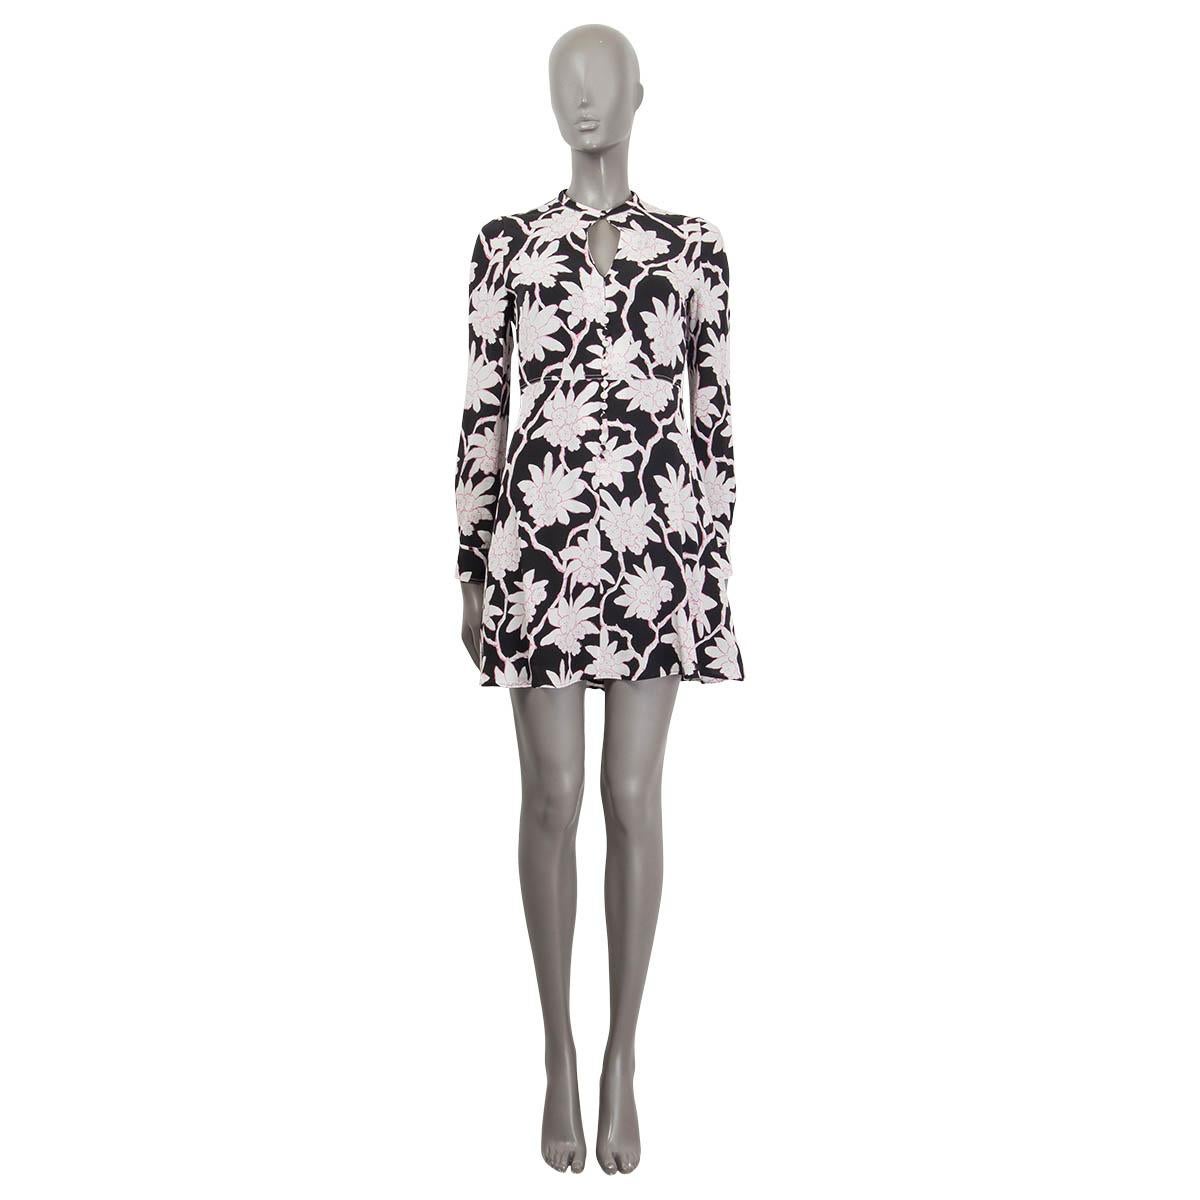 100% authentic Valentino 2018 keyhole dress in black, white and pink silk (100%). Features a rhododendron floral print, long sleeves and buttoned cuffs. Opens with one button on the front and a concealed zipper and hook at the back. Lined in black